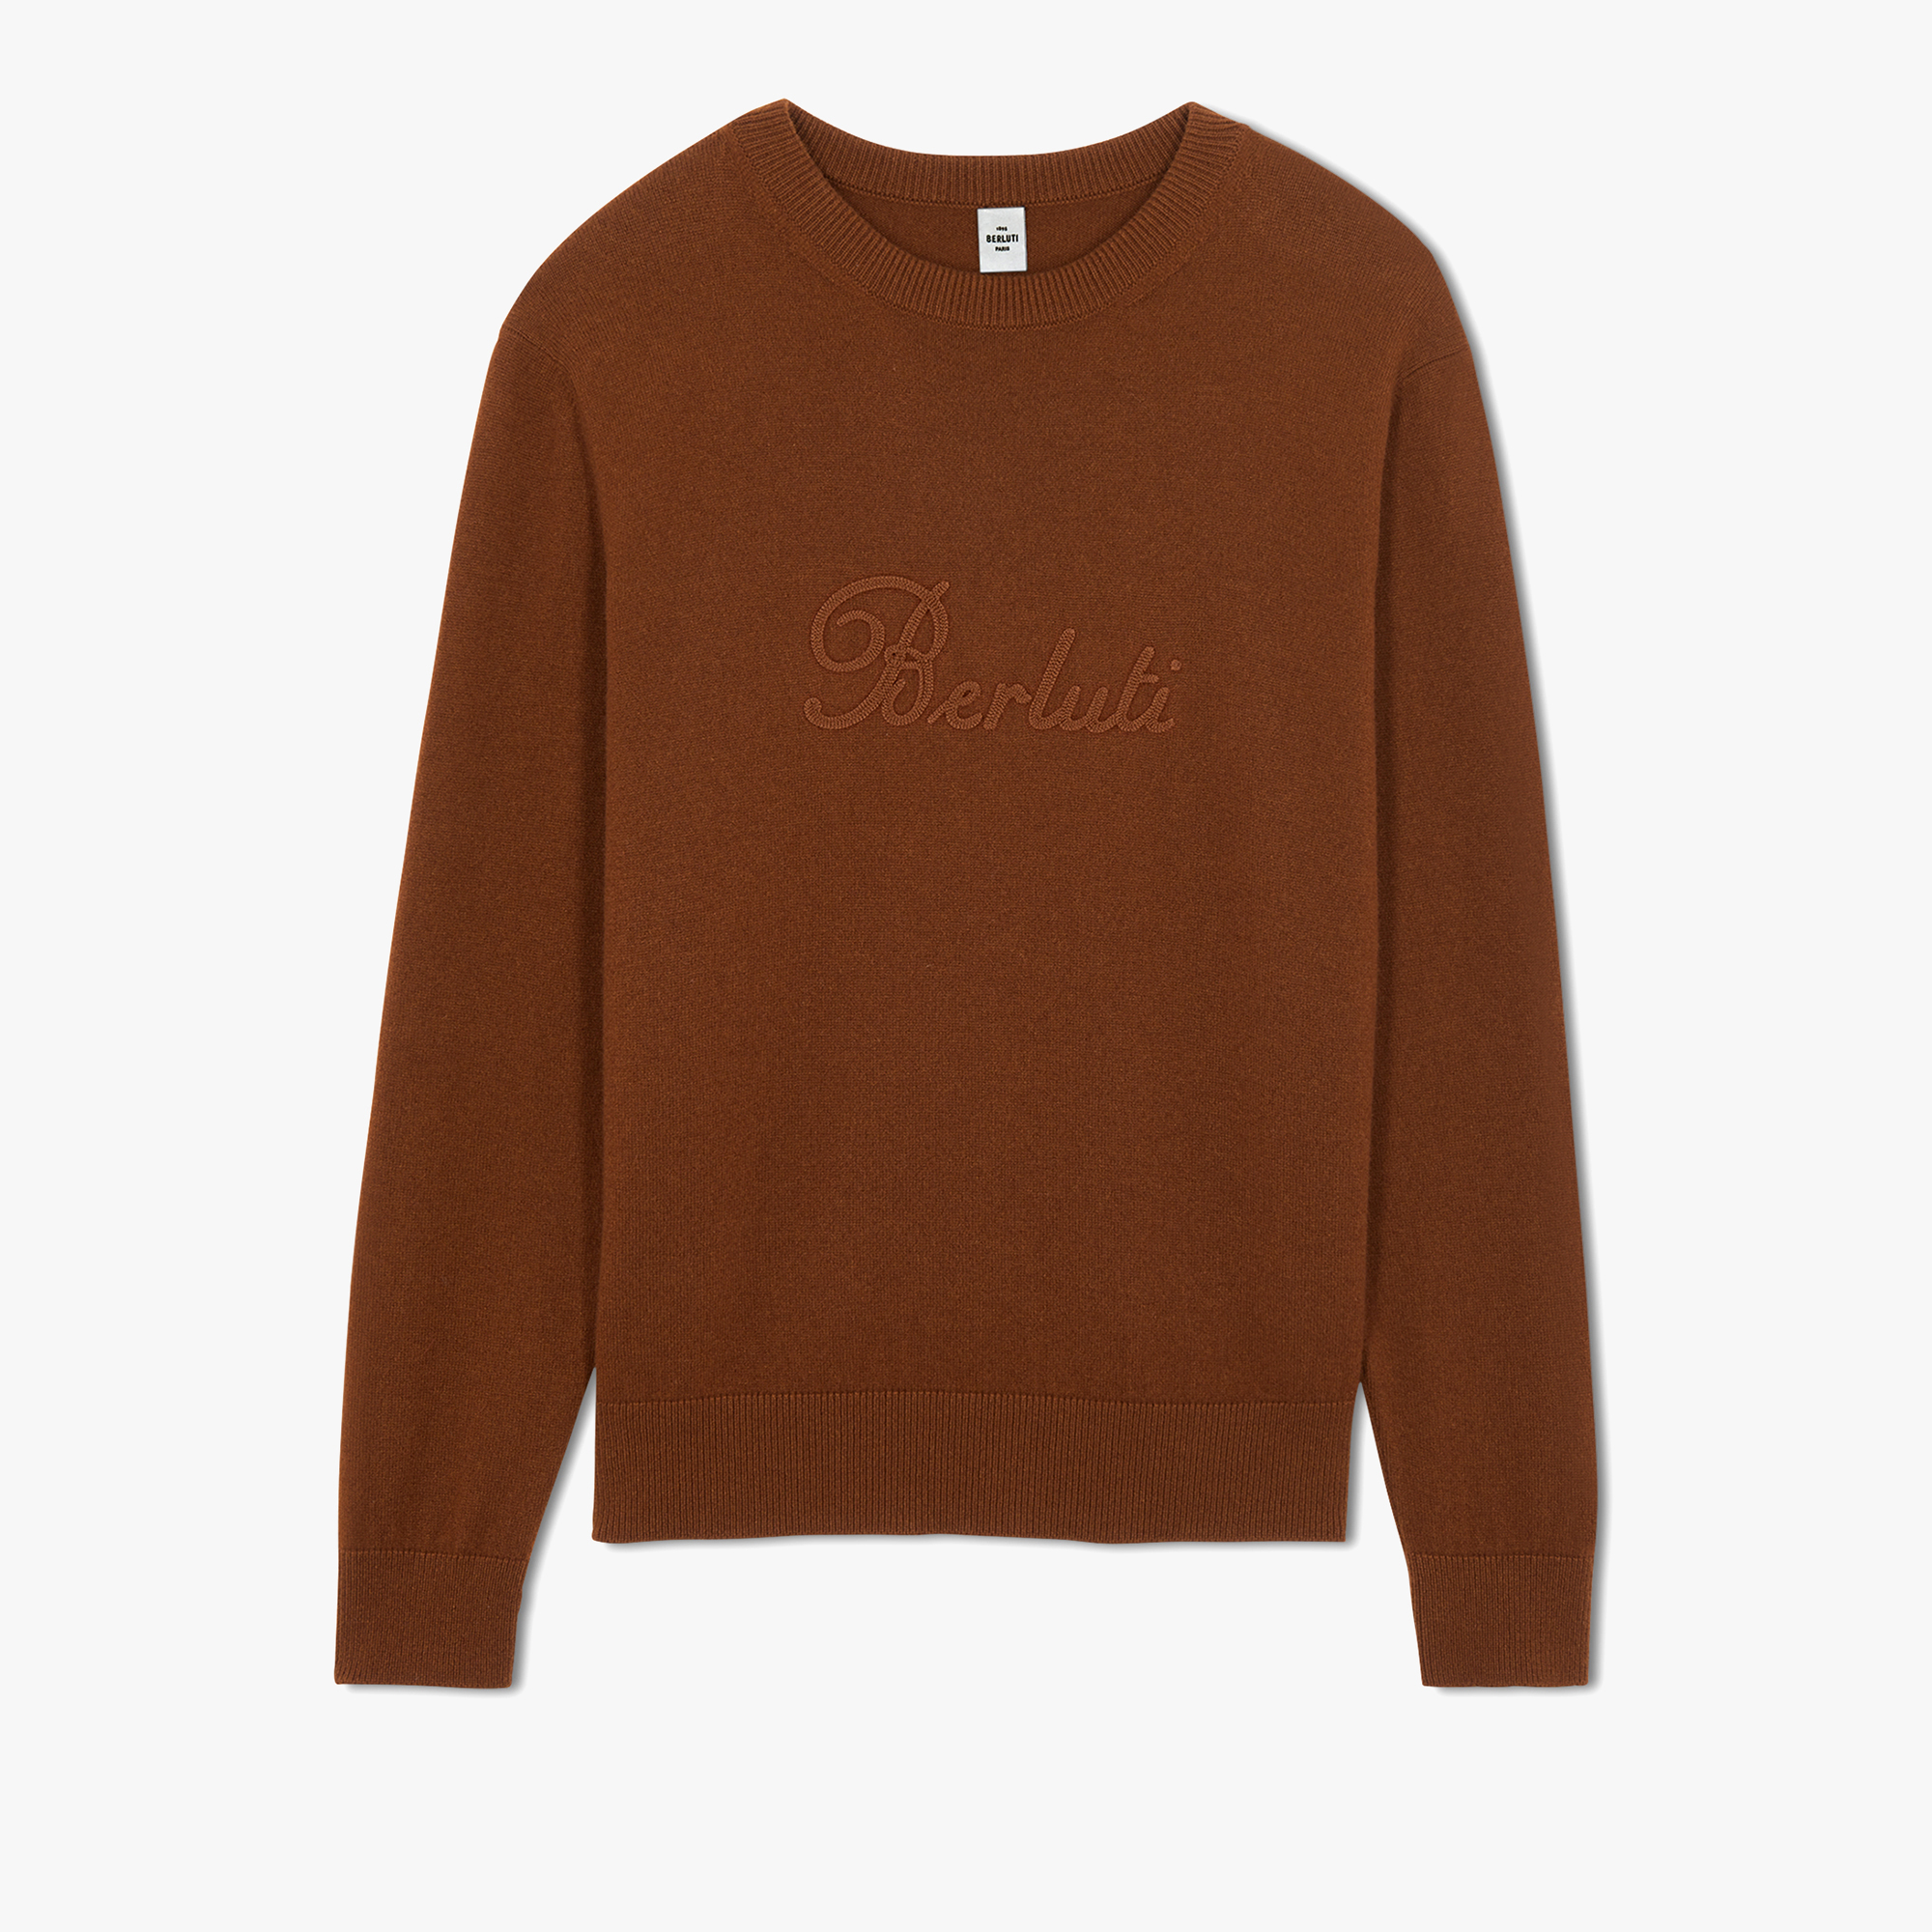 Cashmere Sweater With Embroidered Logo, TOFFEE CAMEL, hi-res